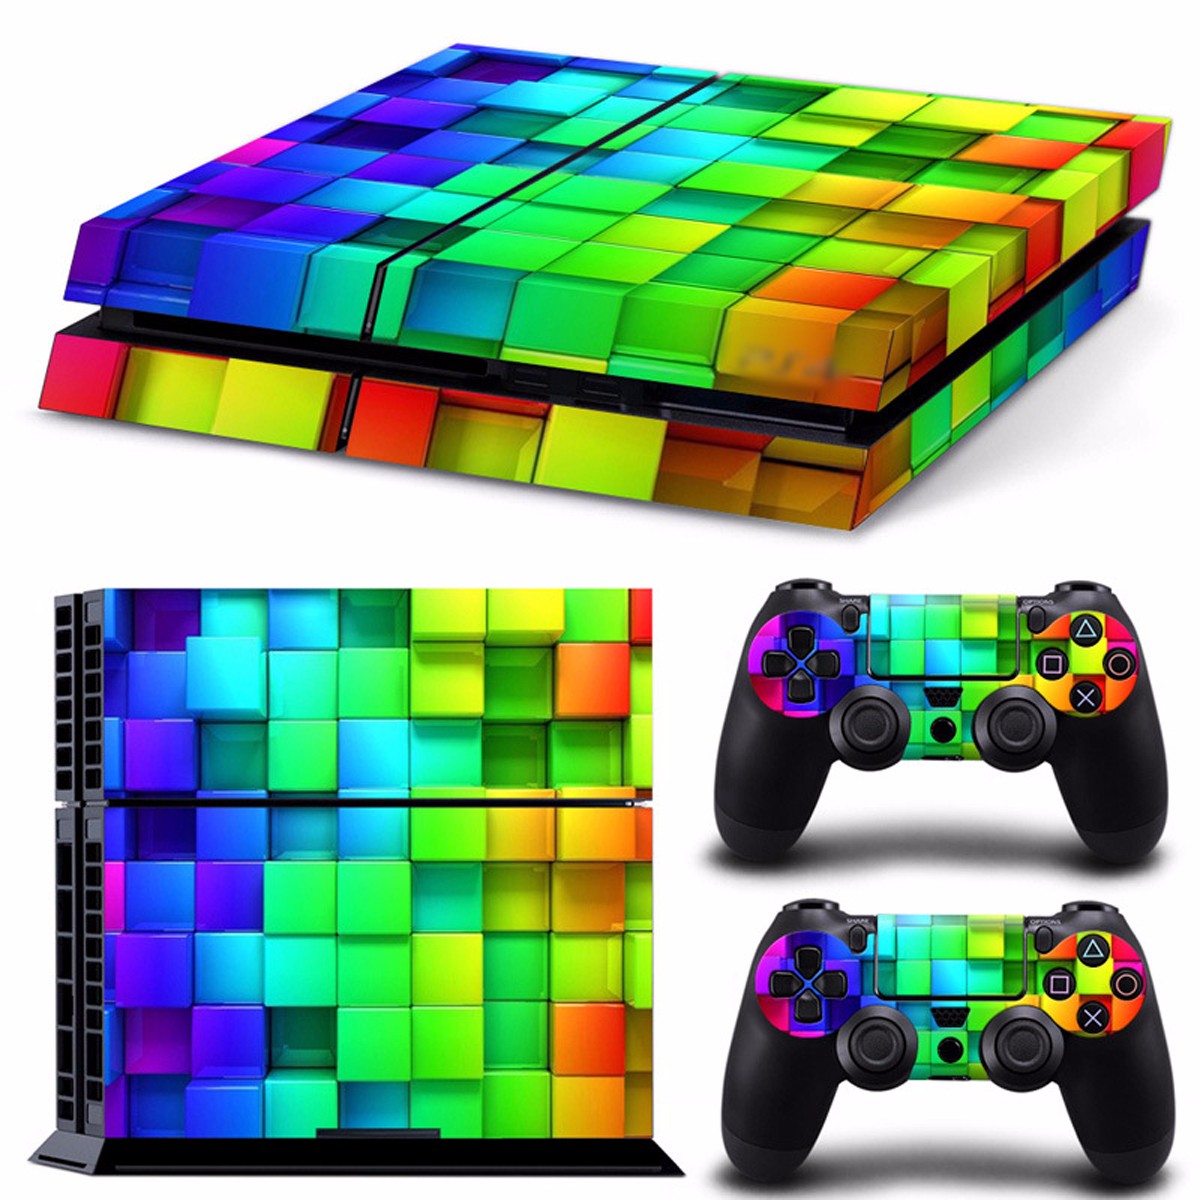 Lattice Style Vinyl Skin Decal For PS4 Play Station 4 Console and 2 Controllers 9